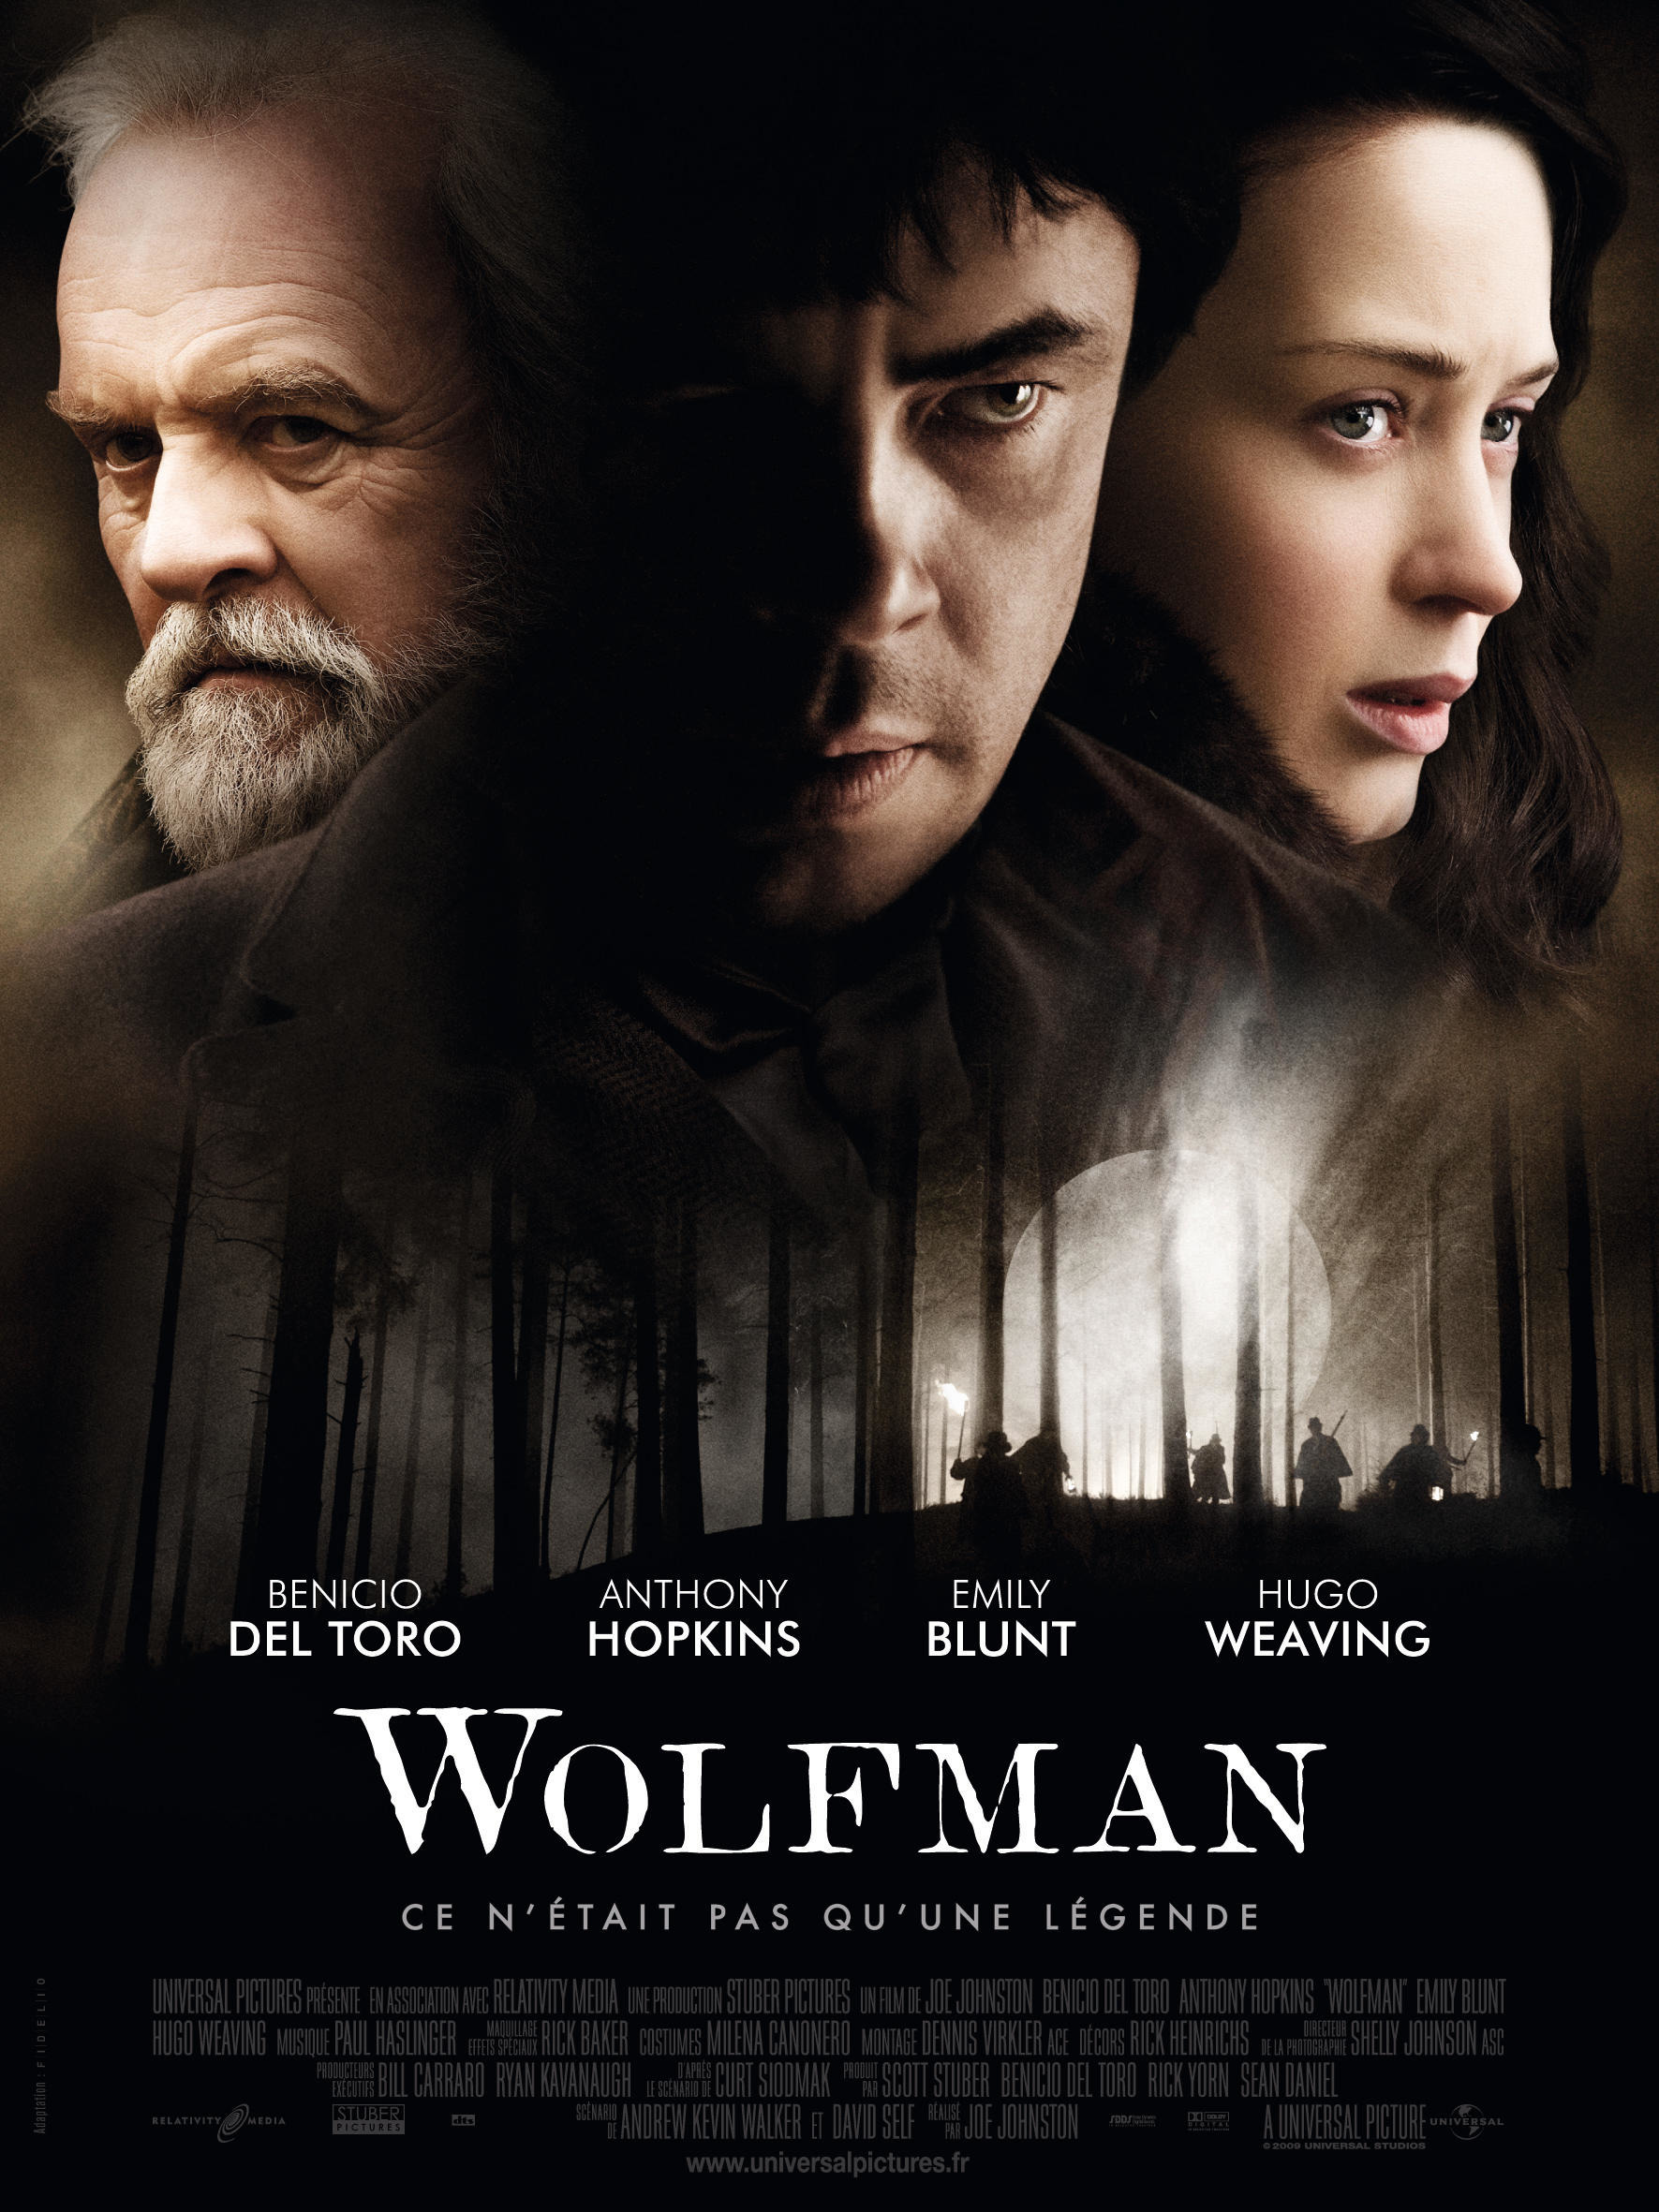 Mega Sized Movie Poster Image for The Wolfman (#8 of 11)